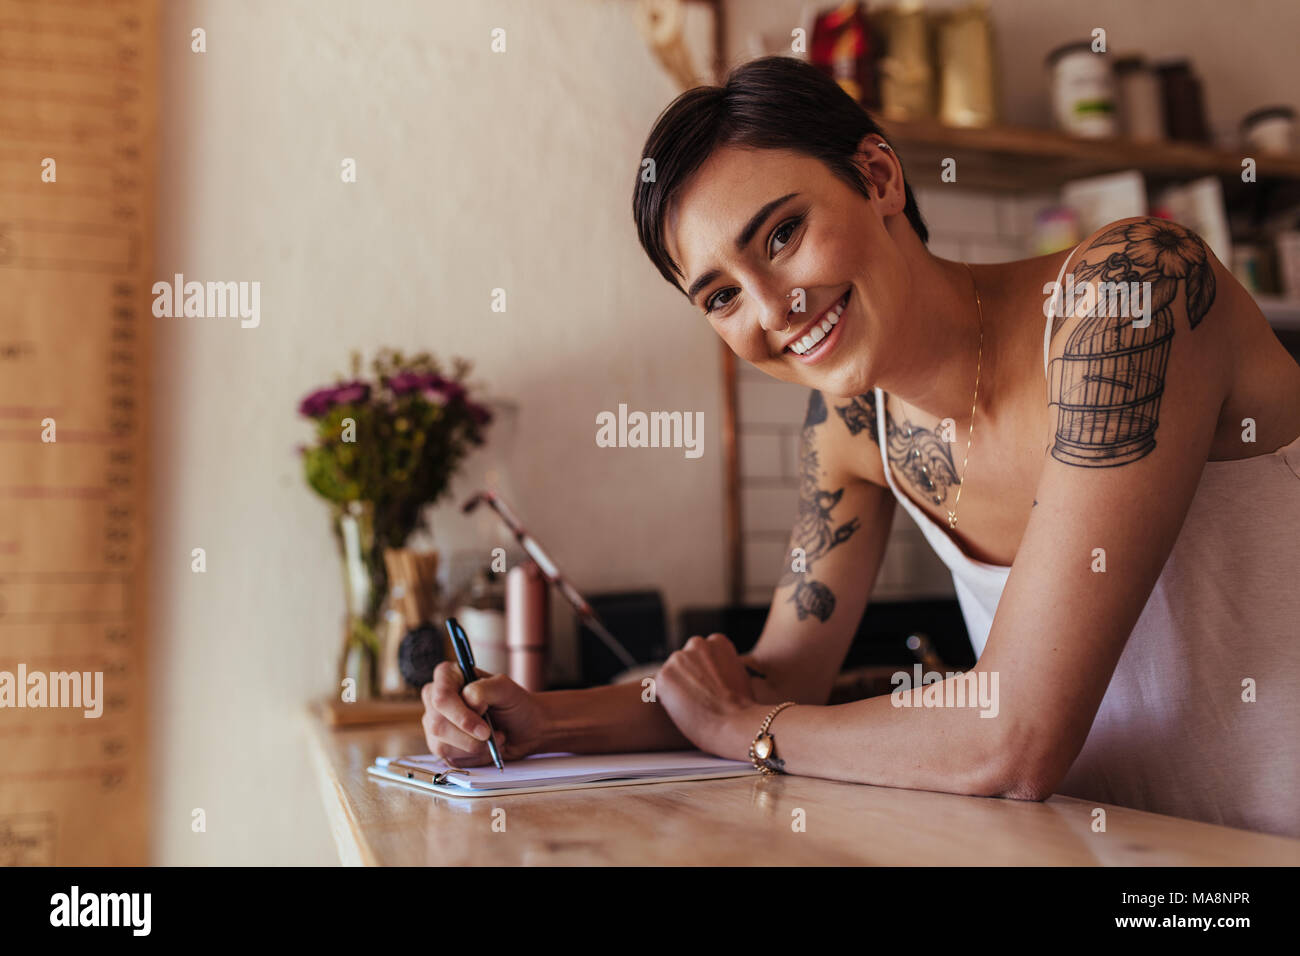 Smiling woman at the counter of her cafe with a pen and pad. Restaurant owner making notes standing at the billing counter. Stock Photo